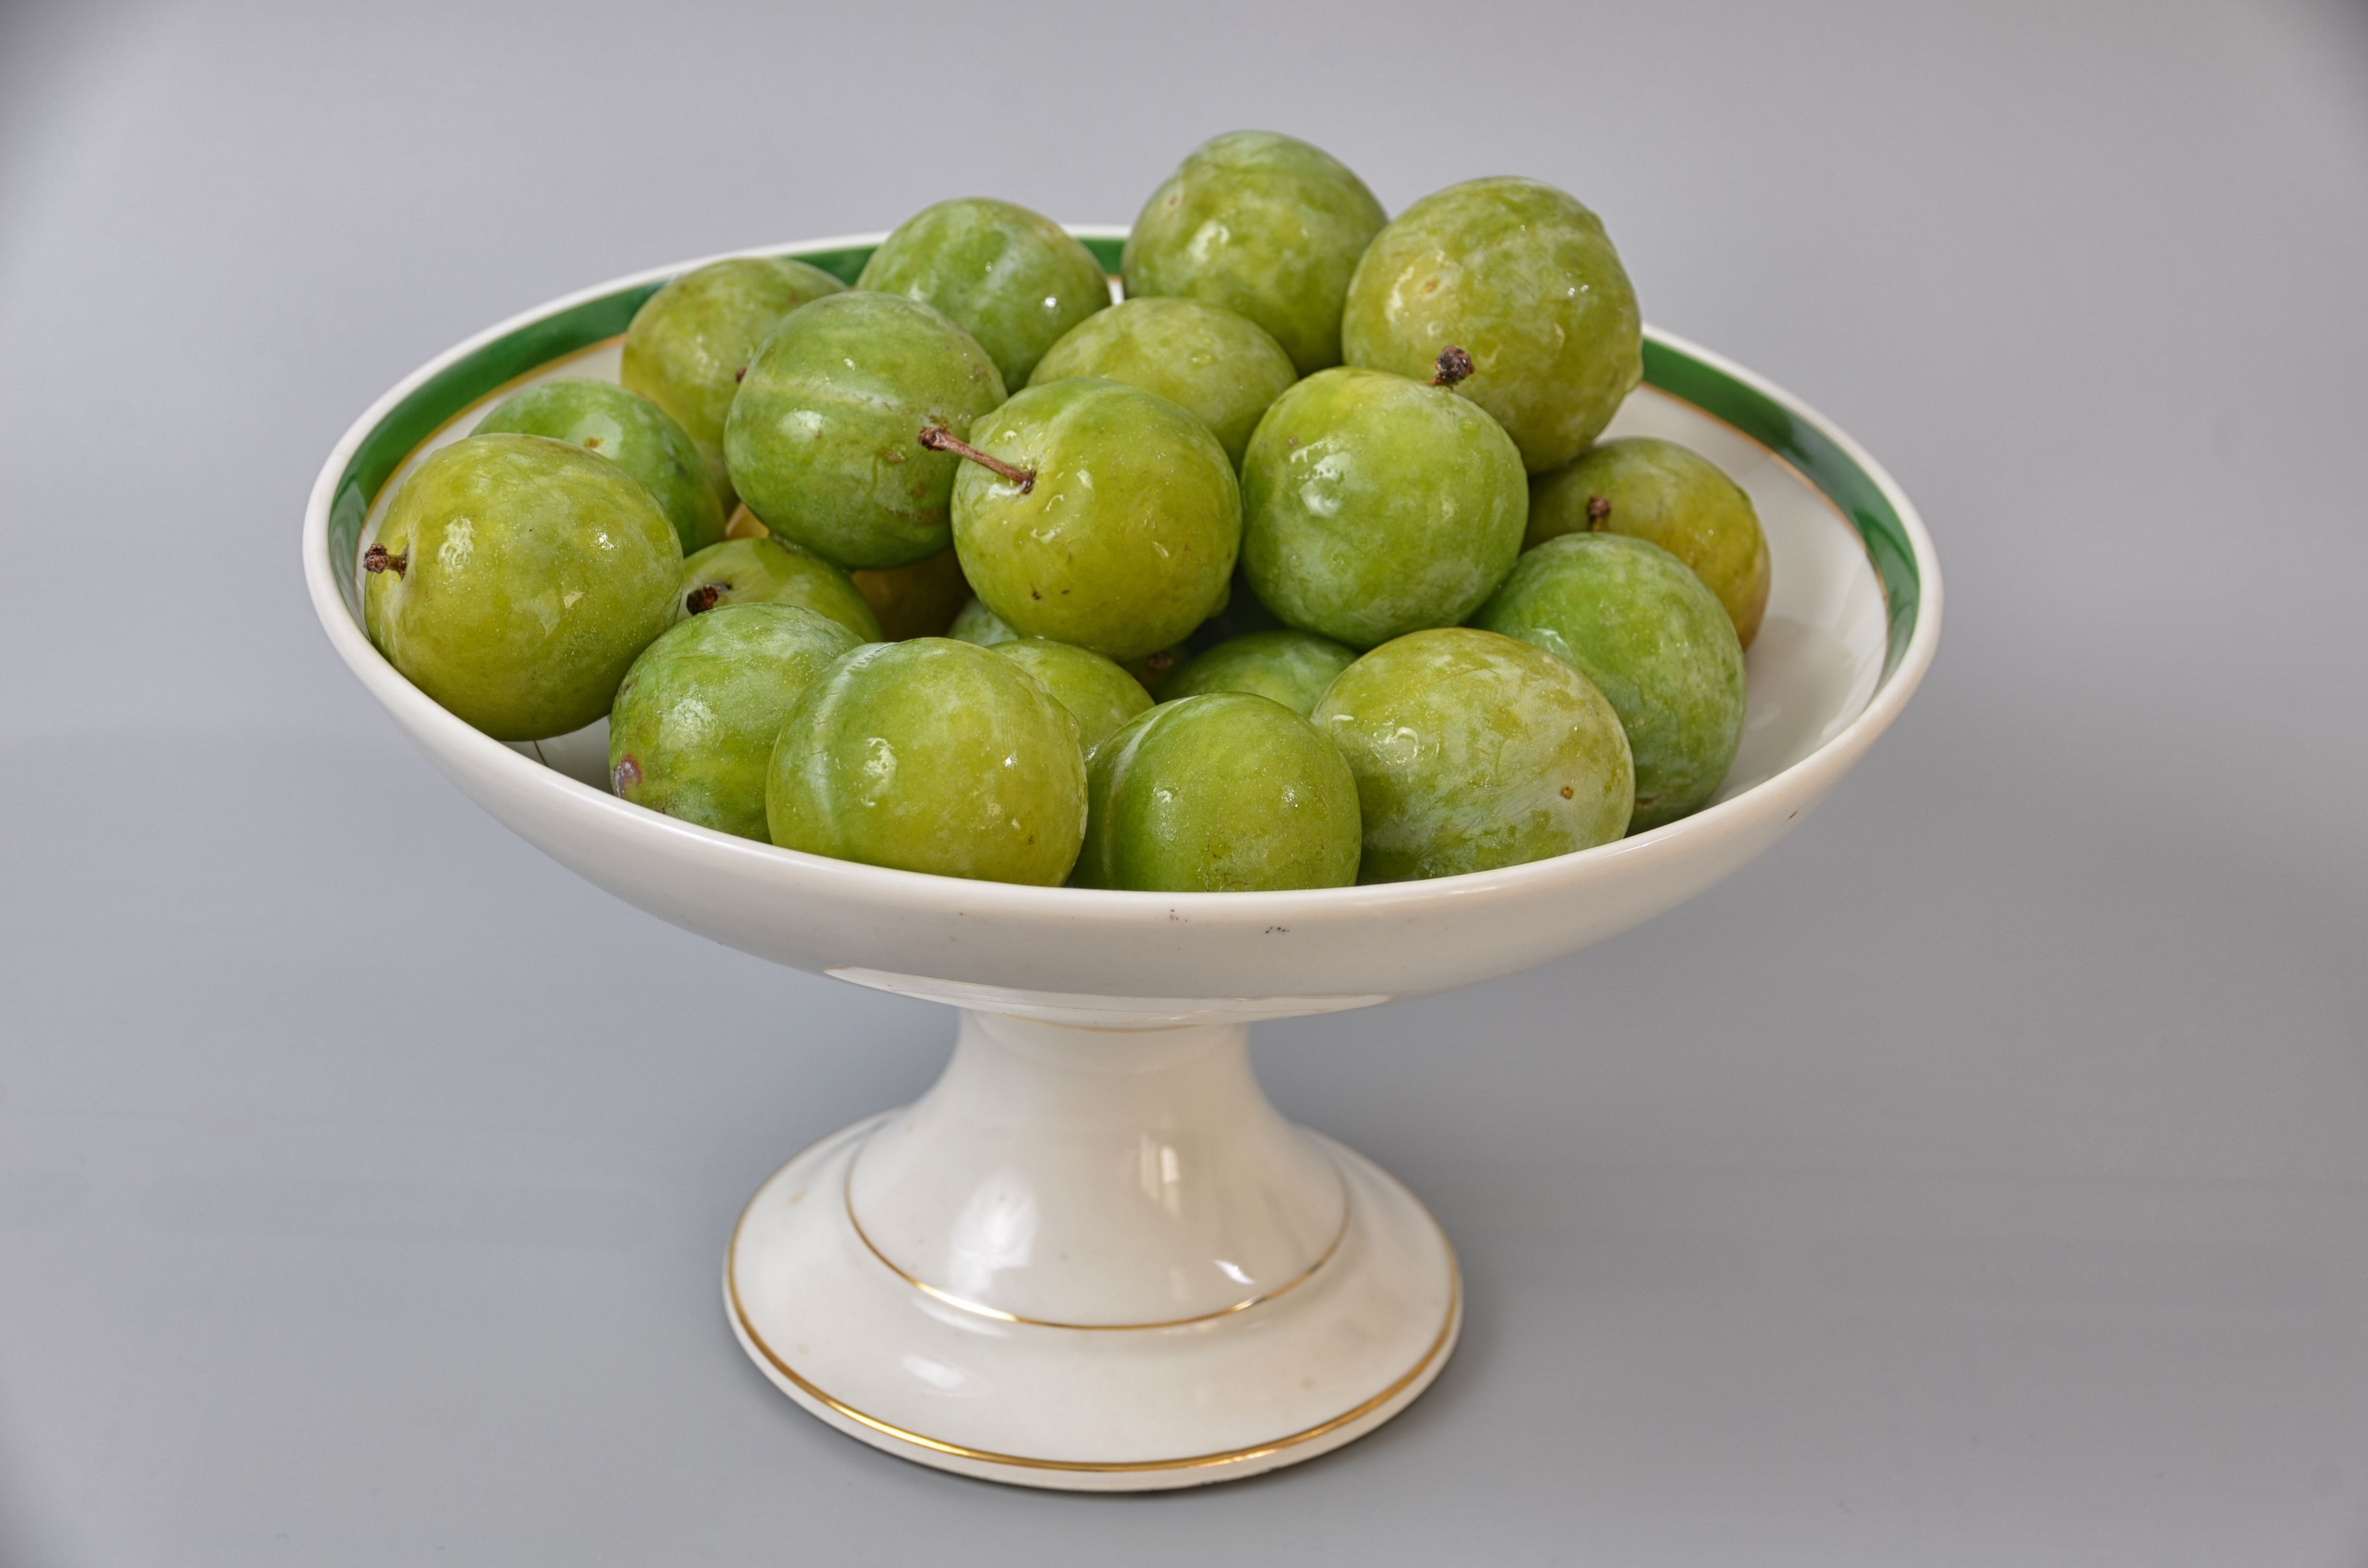 green fruits on white ceramic footed bowl